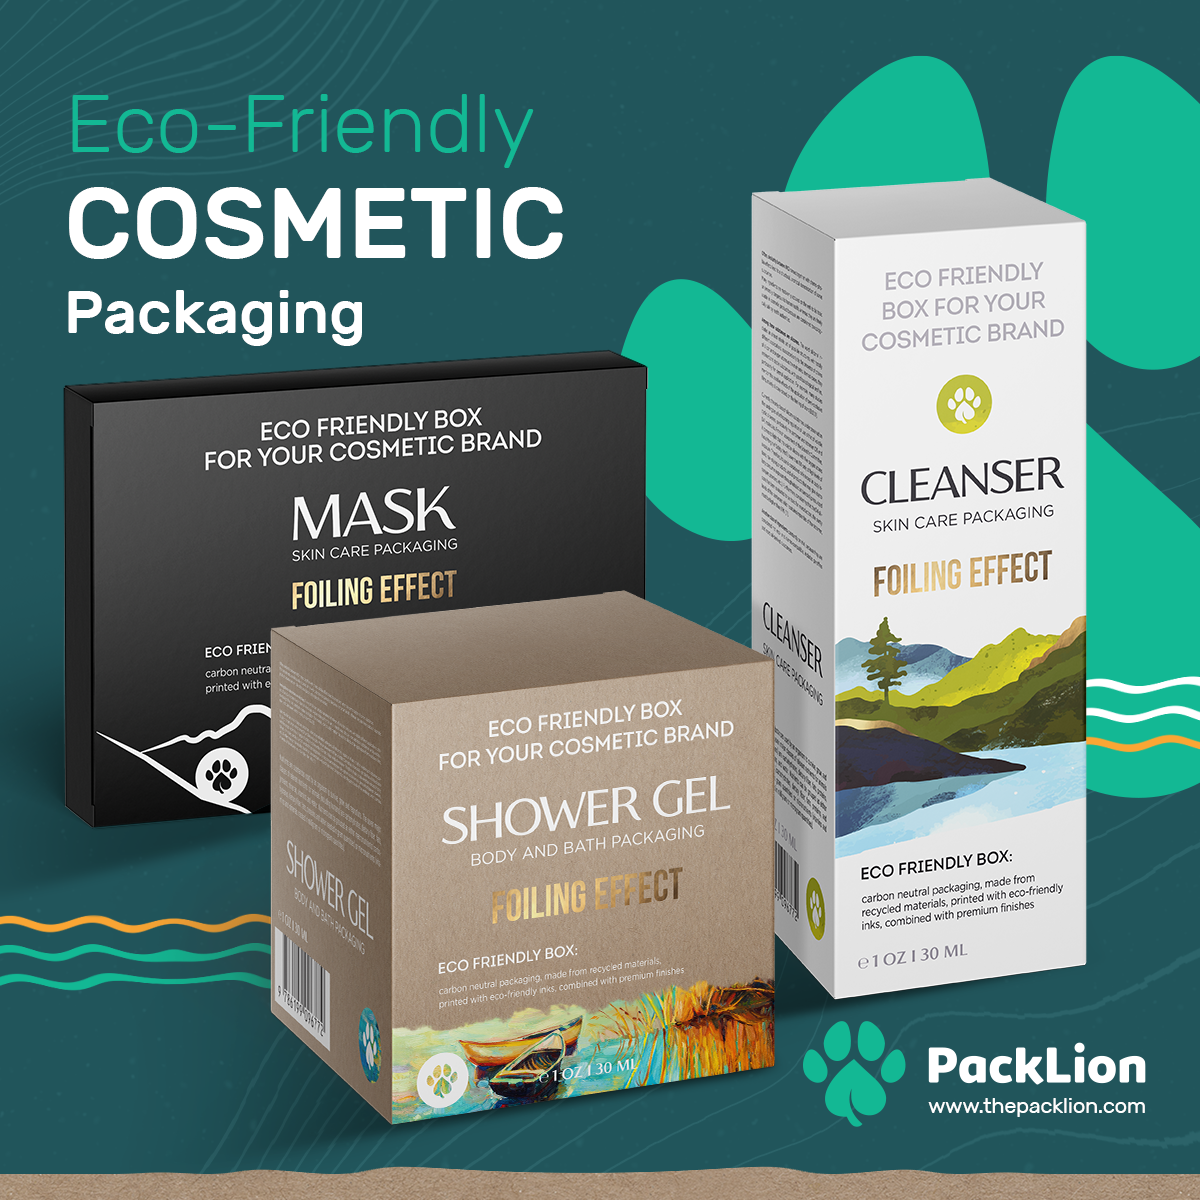 Buying Cosmetics Eco-Friendly Packaging has never been easier!